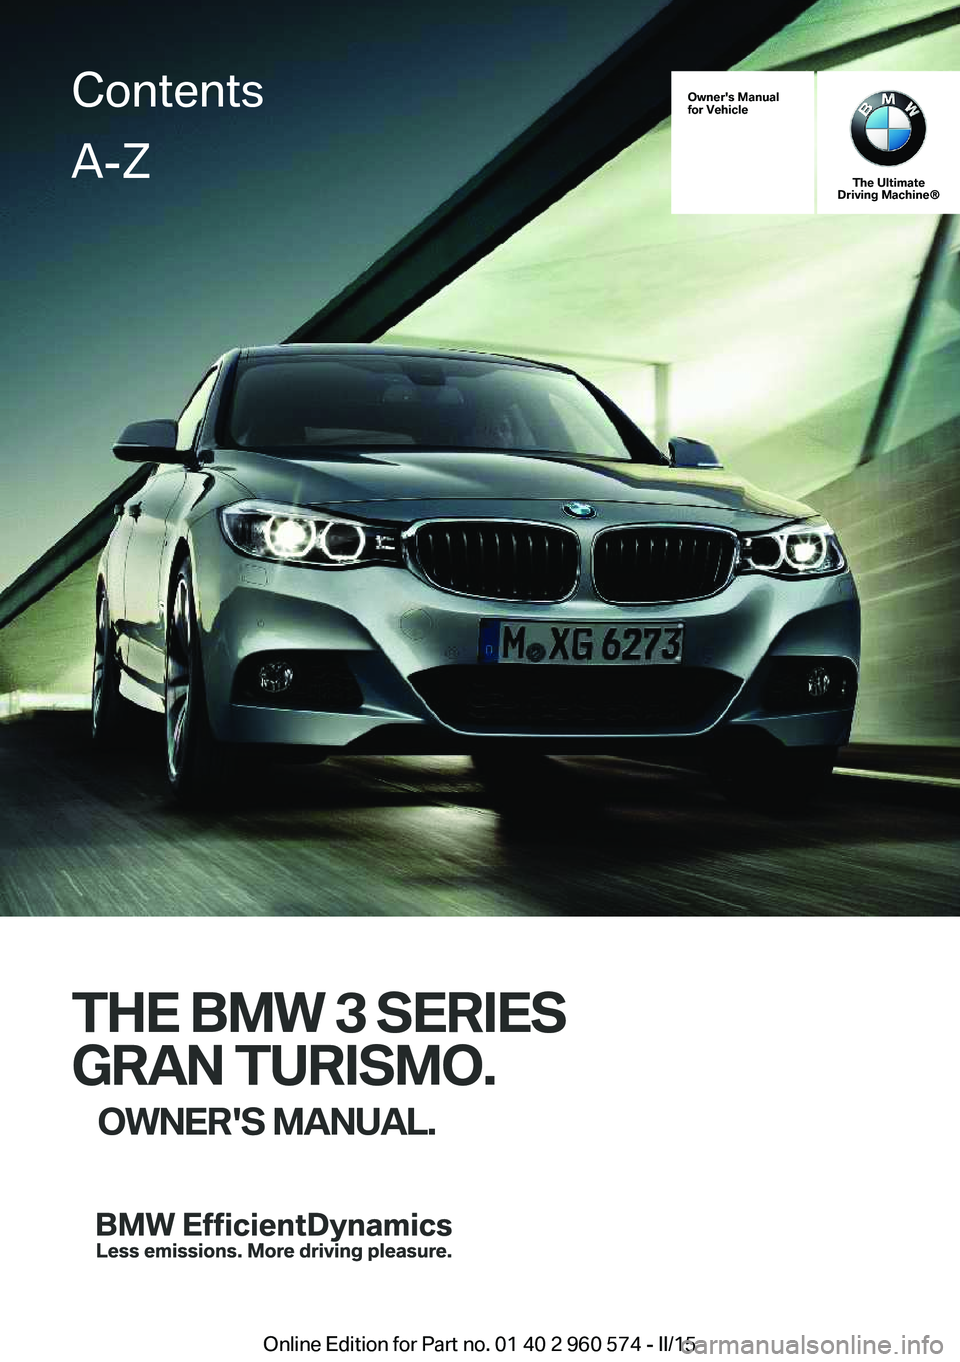 BMW 328I XDRIVE GRAN TURISMO 2016  Owners Manual Owner's Manual
for Vehicle
The Ultimate
Driving Machine®
THE BMW 3 SERIES
GRAN TURISMO. OWNER'S MANUAL.
ContentsA-Z
Online Edition for Part no. 01 40 2 960 574 - II/15   